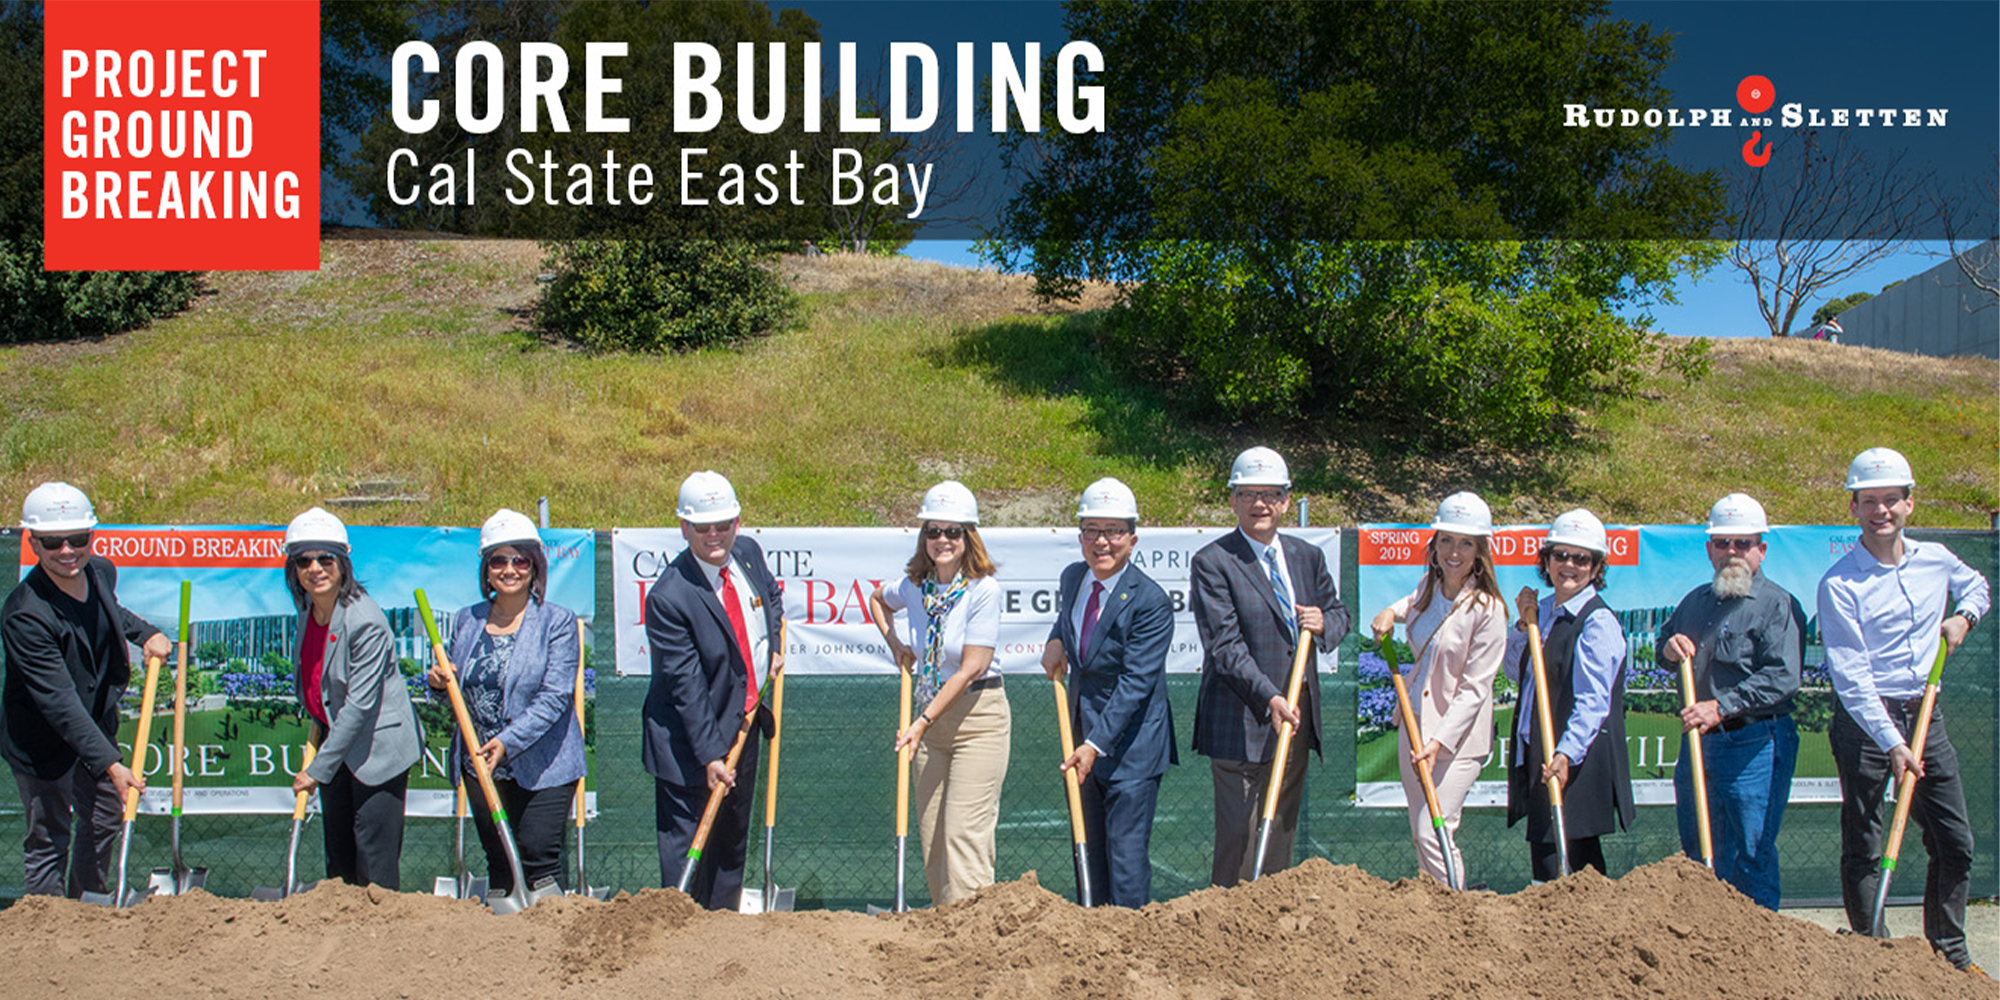 Innovative Library Replacement Breaks Ground at Cal State East Bay